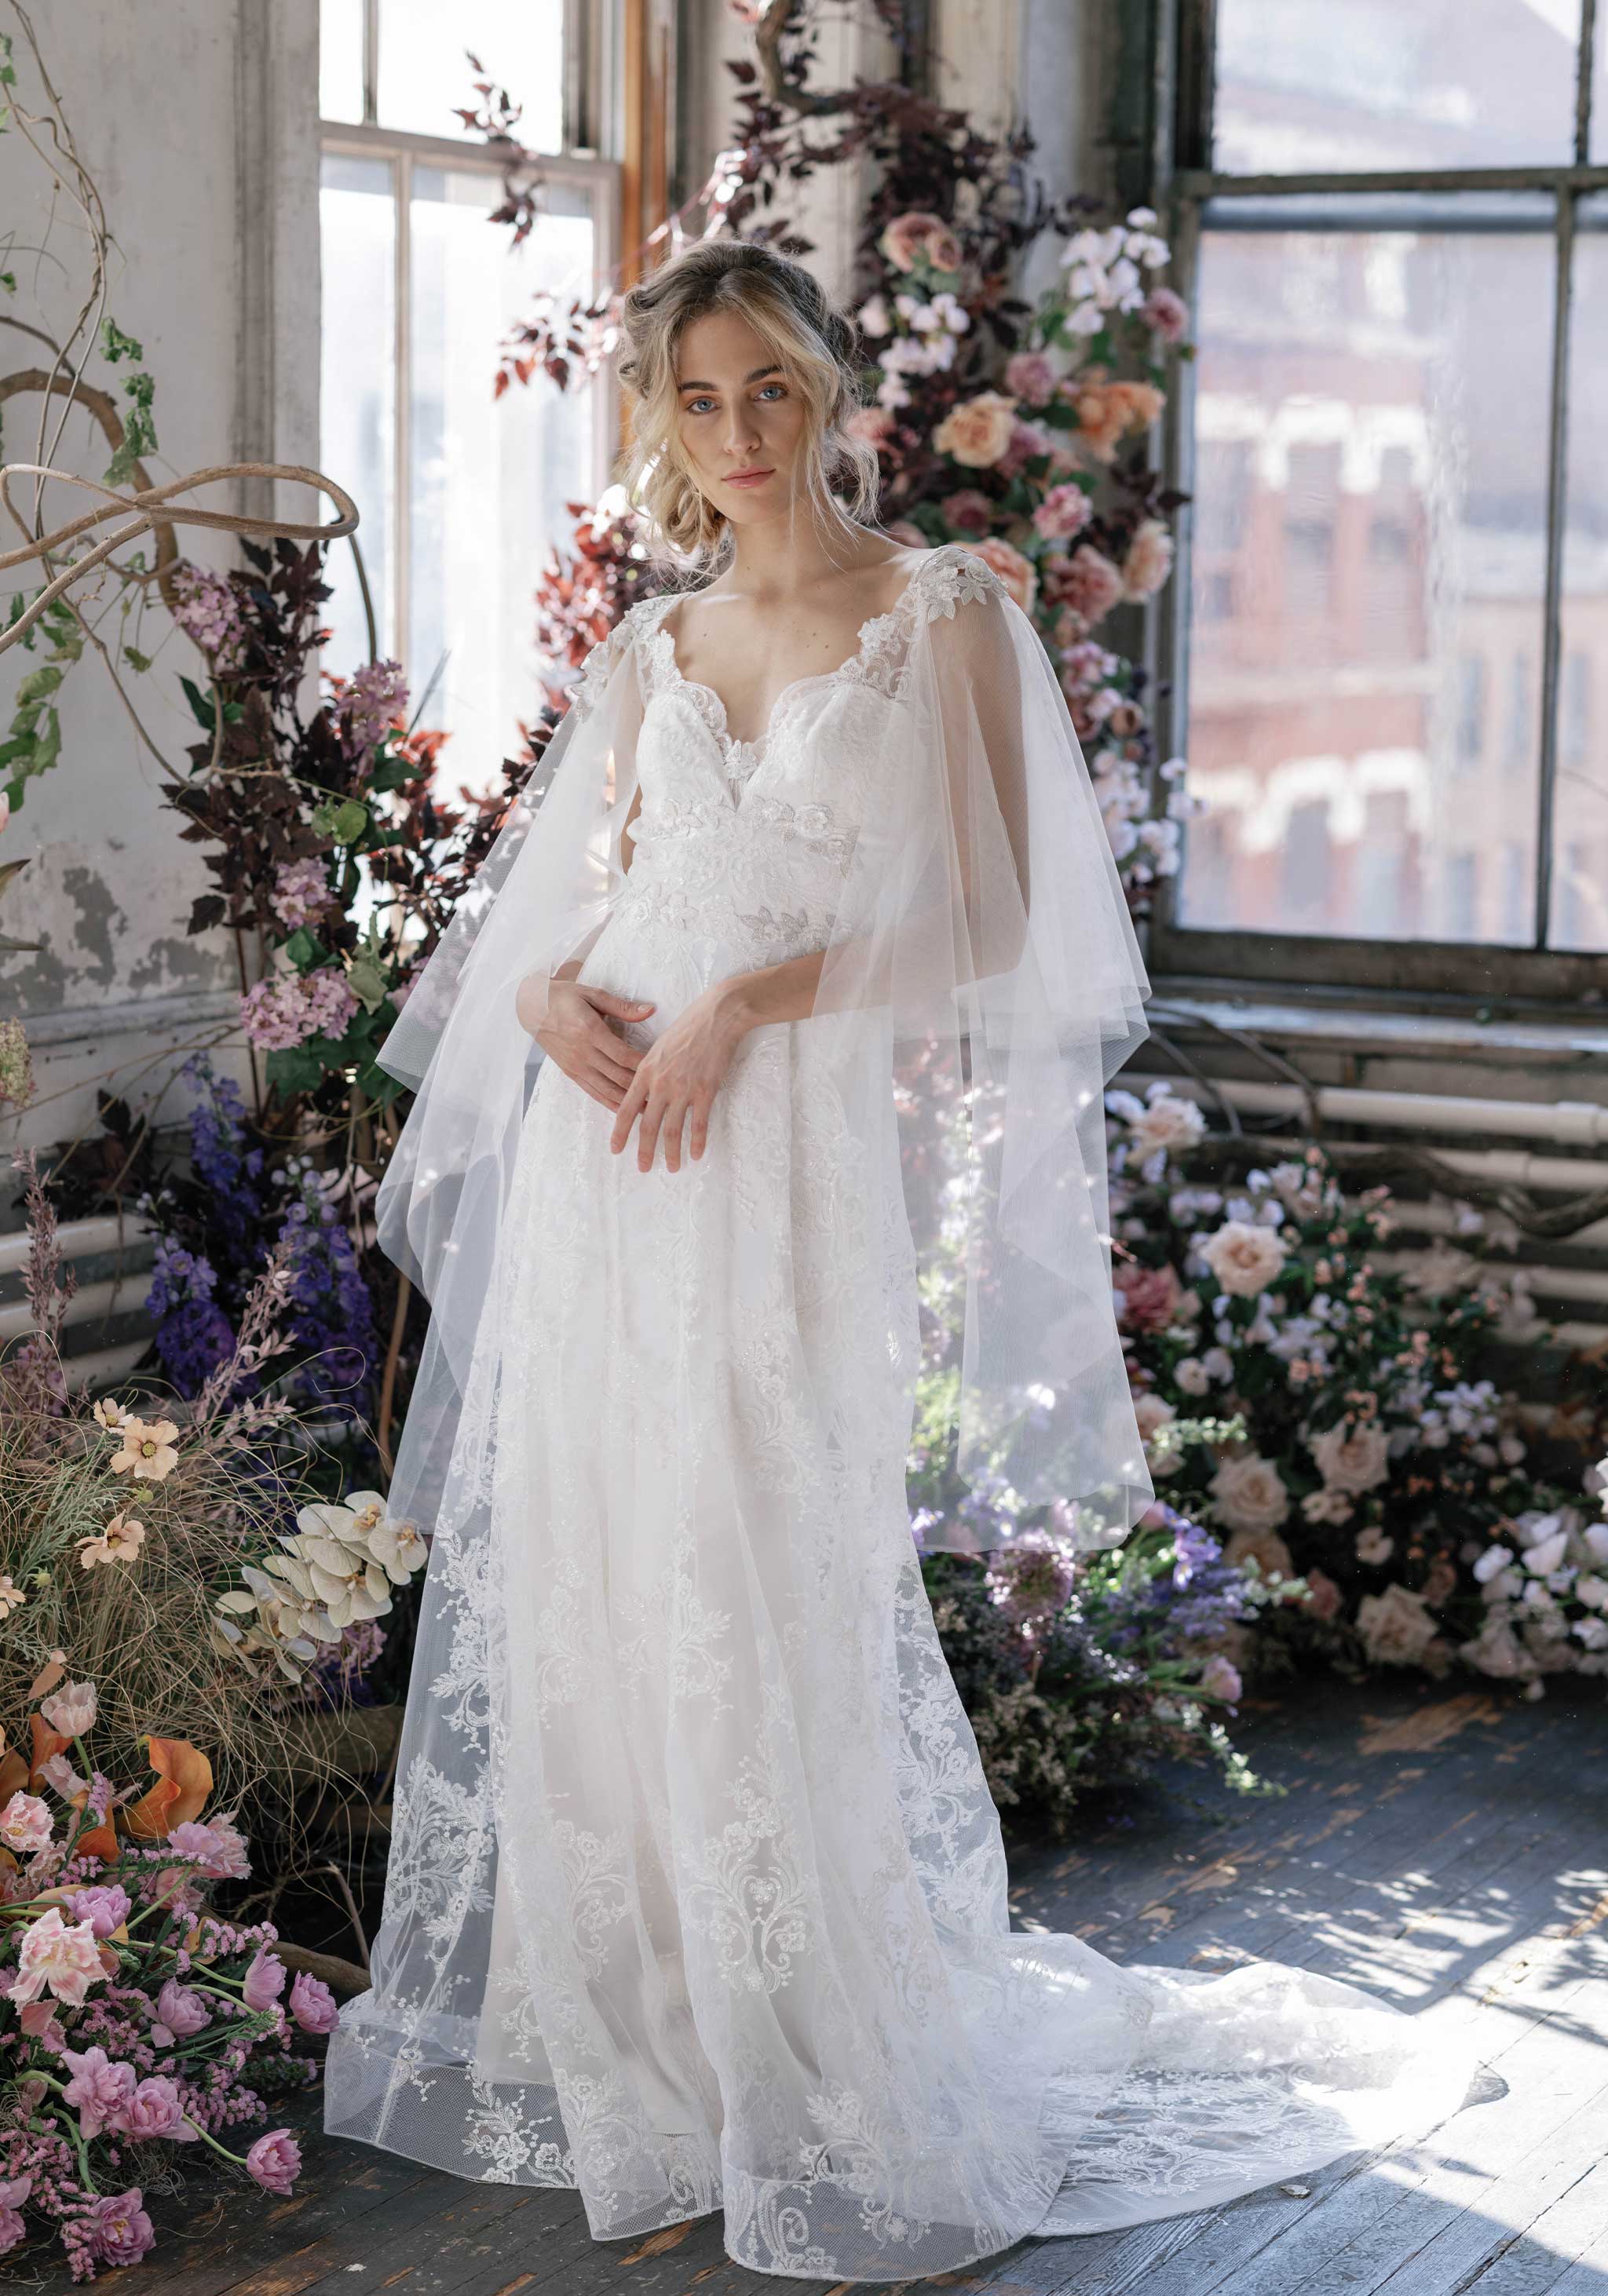 Blooming Beauty: The Perfect Floral Wedding Dress from AW Bridal –  Critiques of a critic